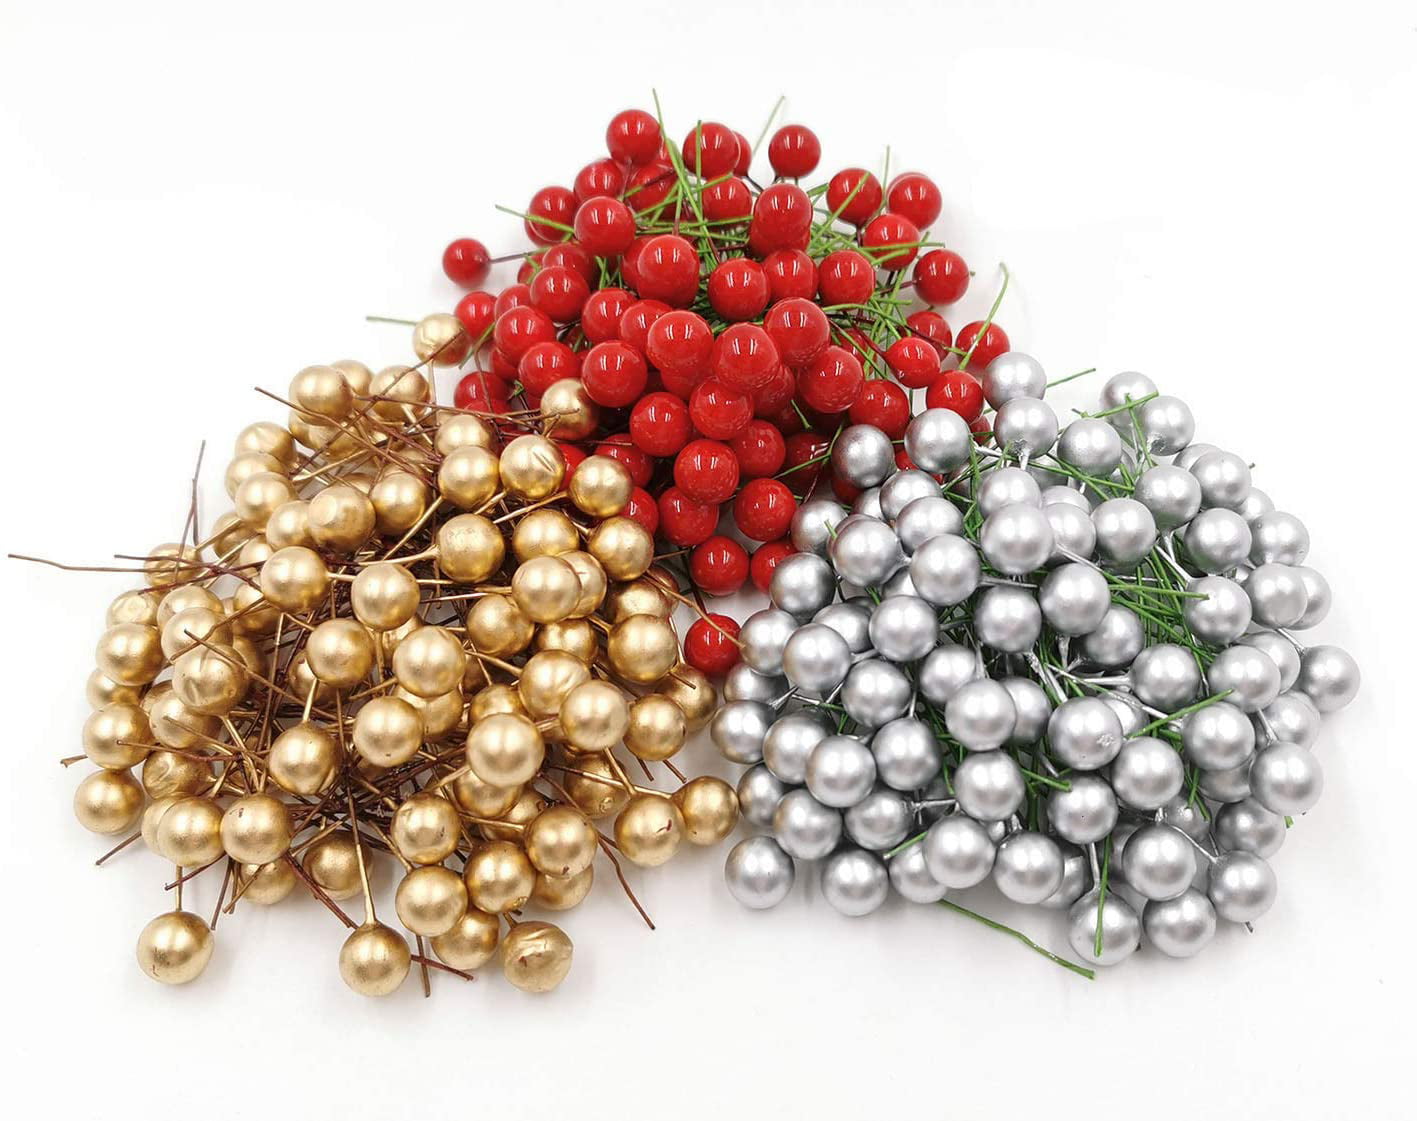 Red MS.CLEO Artificial Holly Berries 10 mm Fake Berries Decor on Wire for Christmas Tree Decorations Flower Wreath DIY Craft Use 300 Pieces